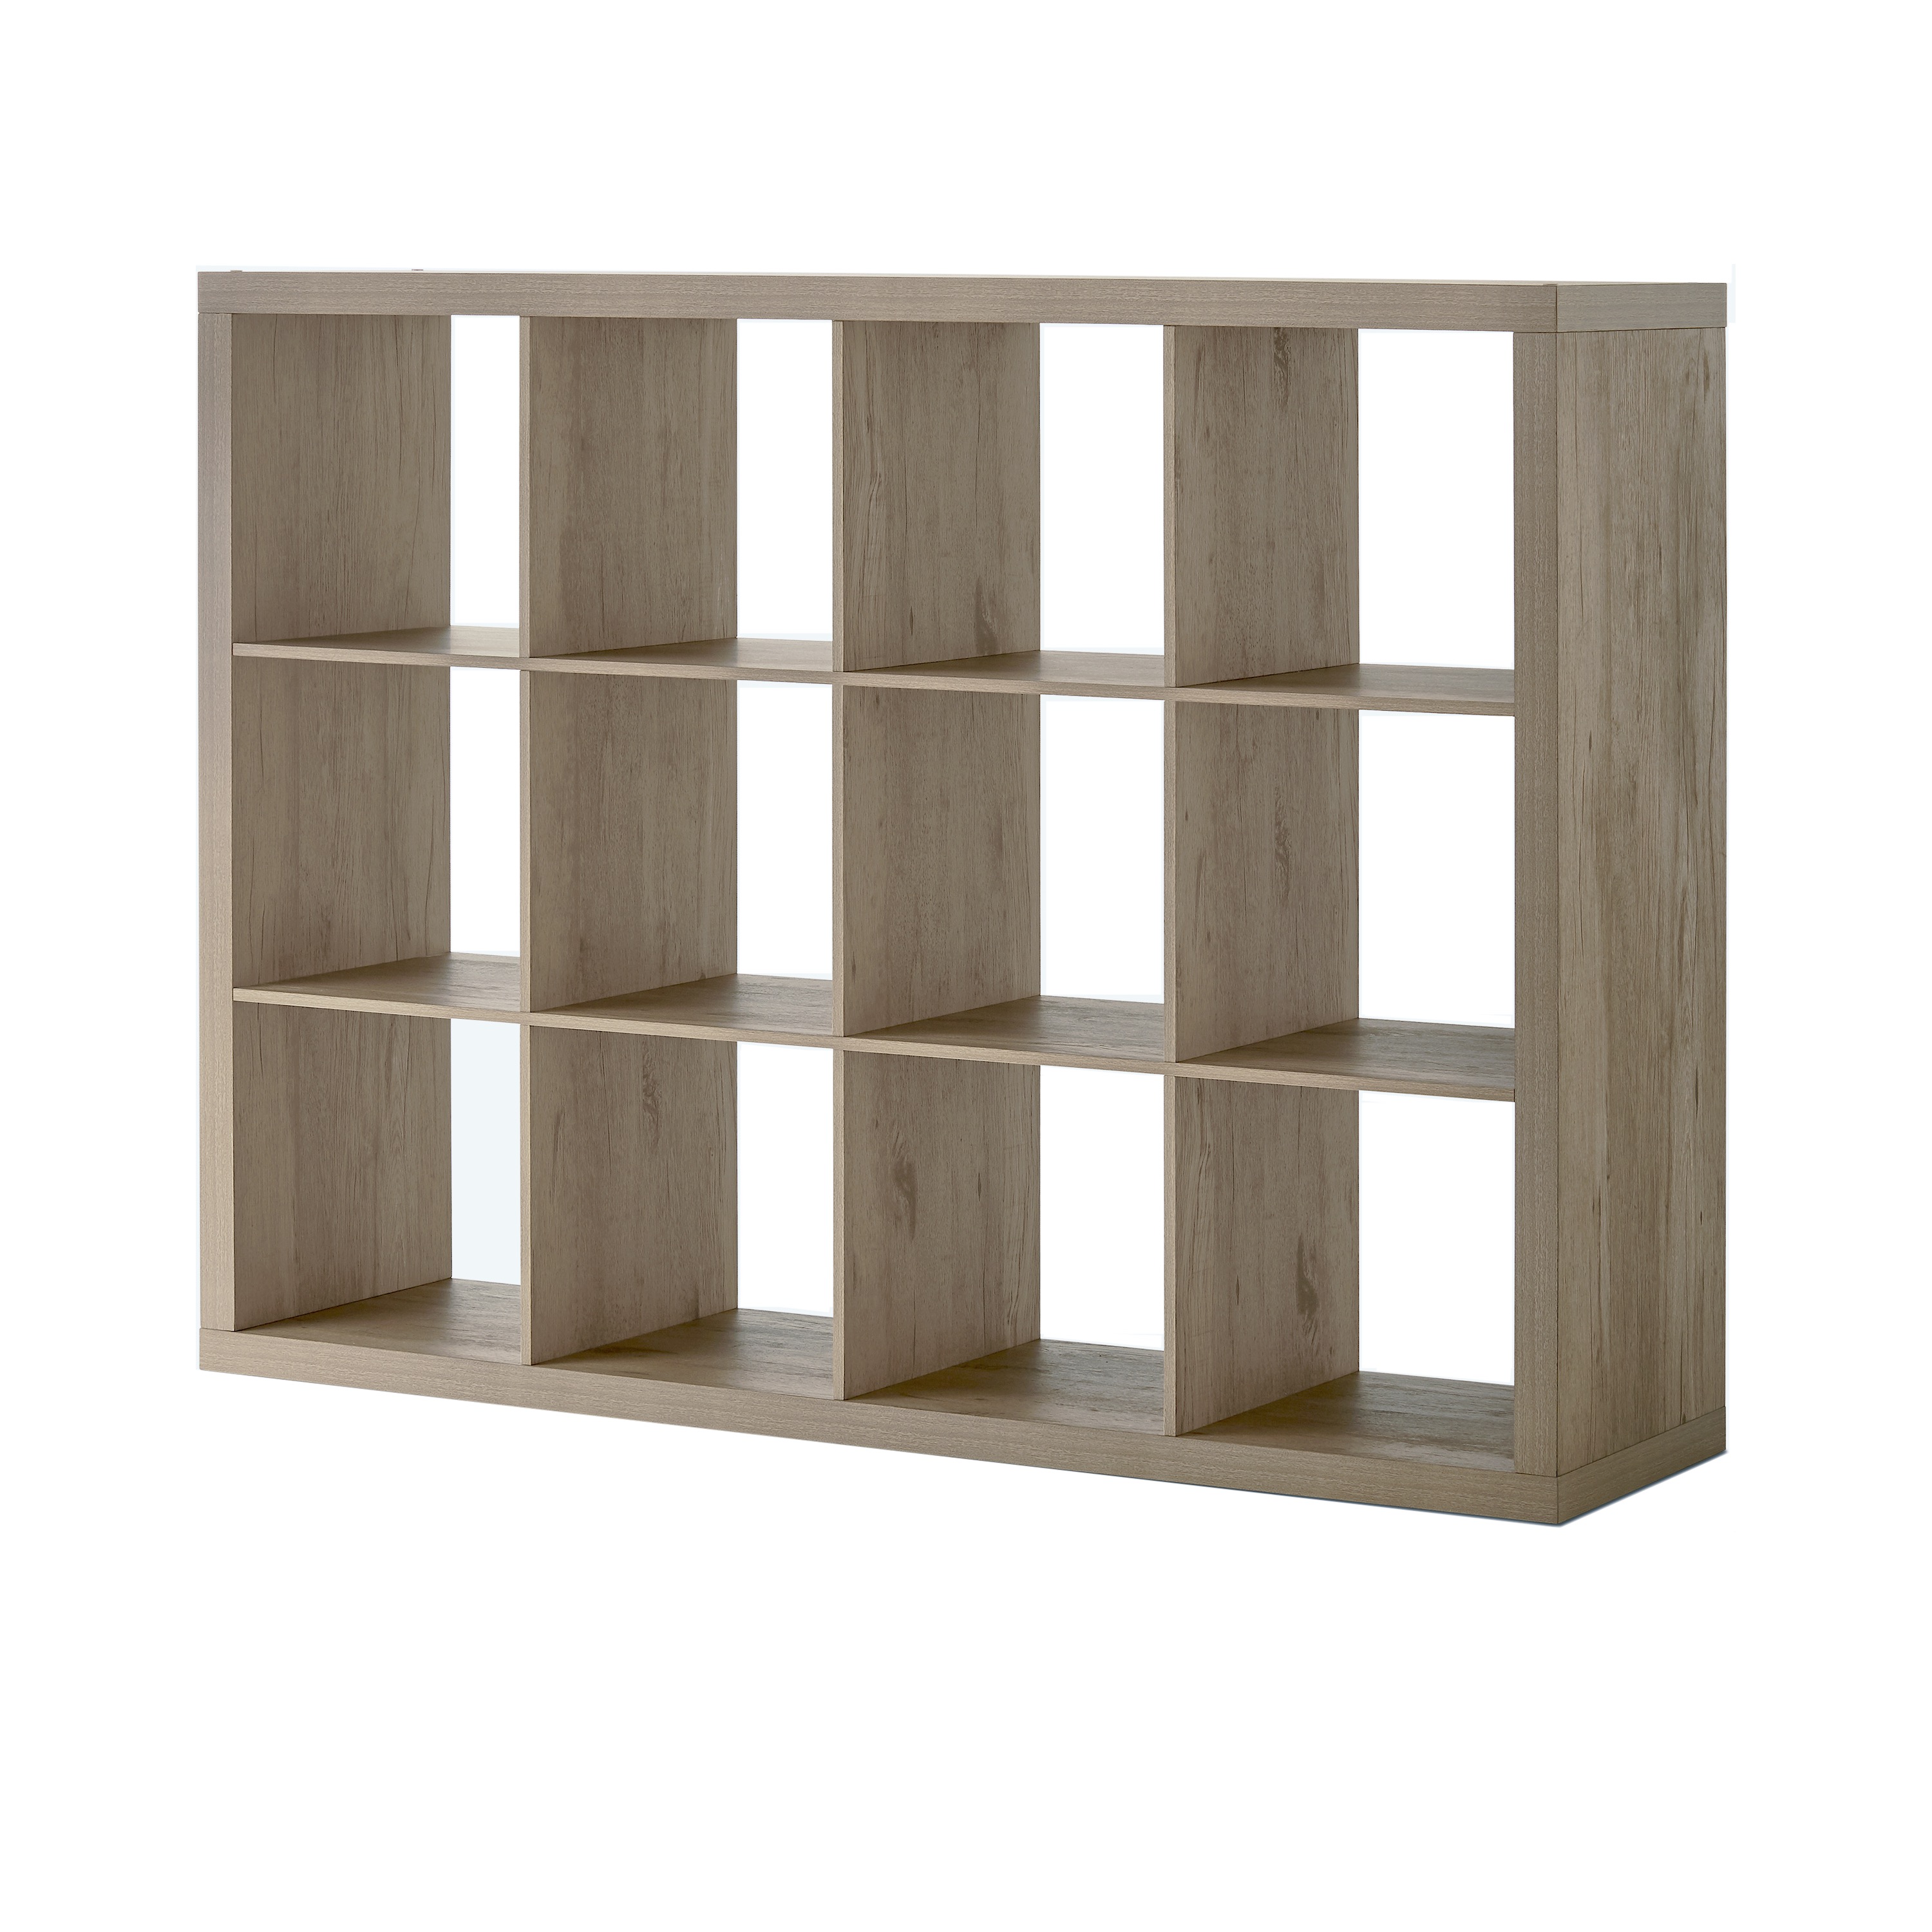 Better Homes & Gardens 12-Cube Storage Organizer, Natural - image 1 of 6